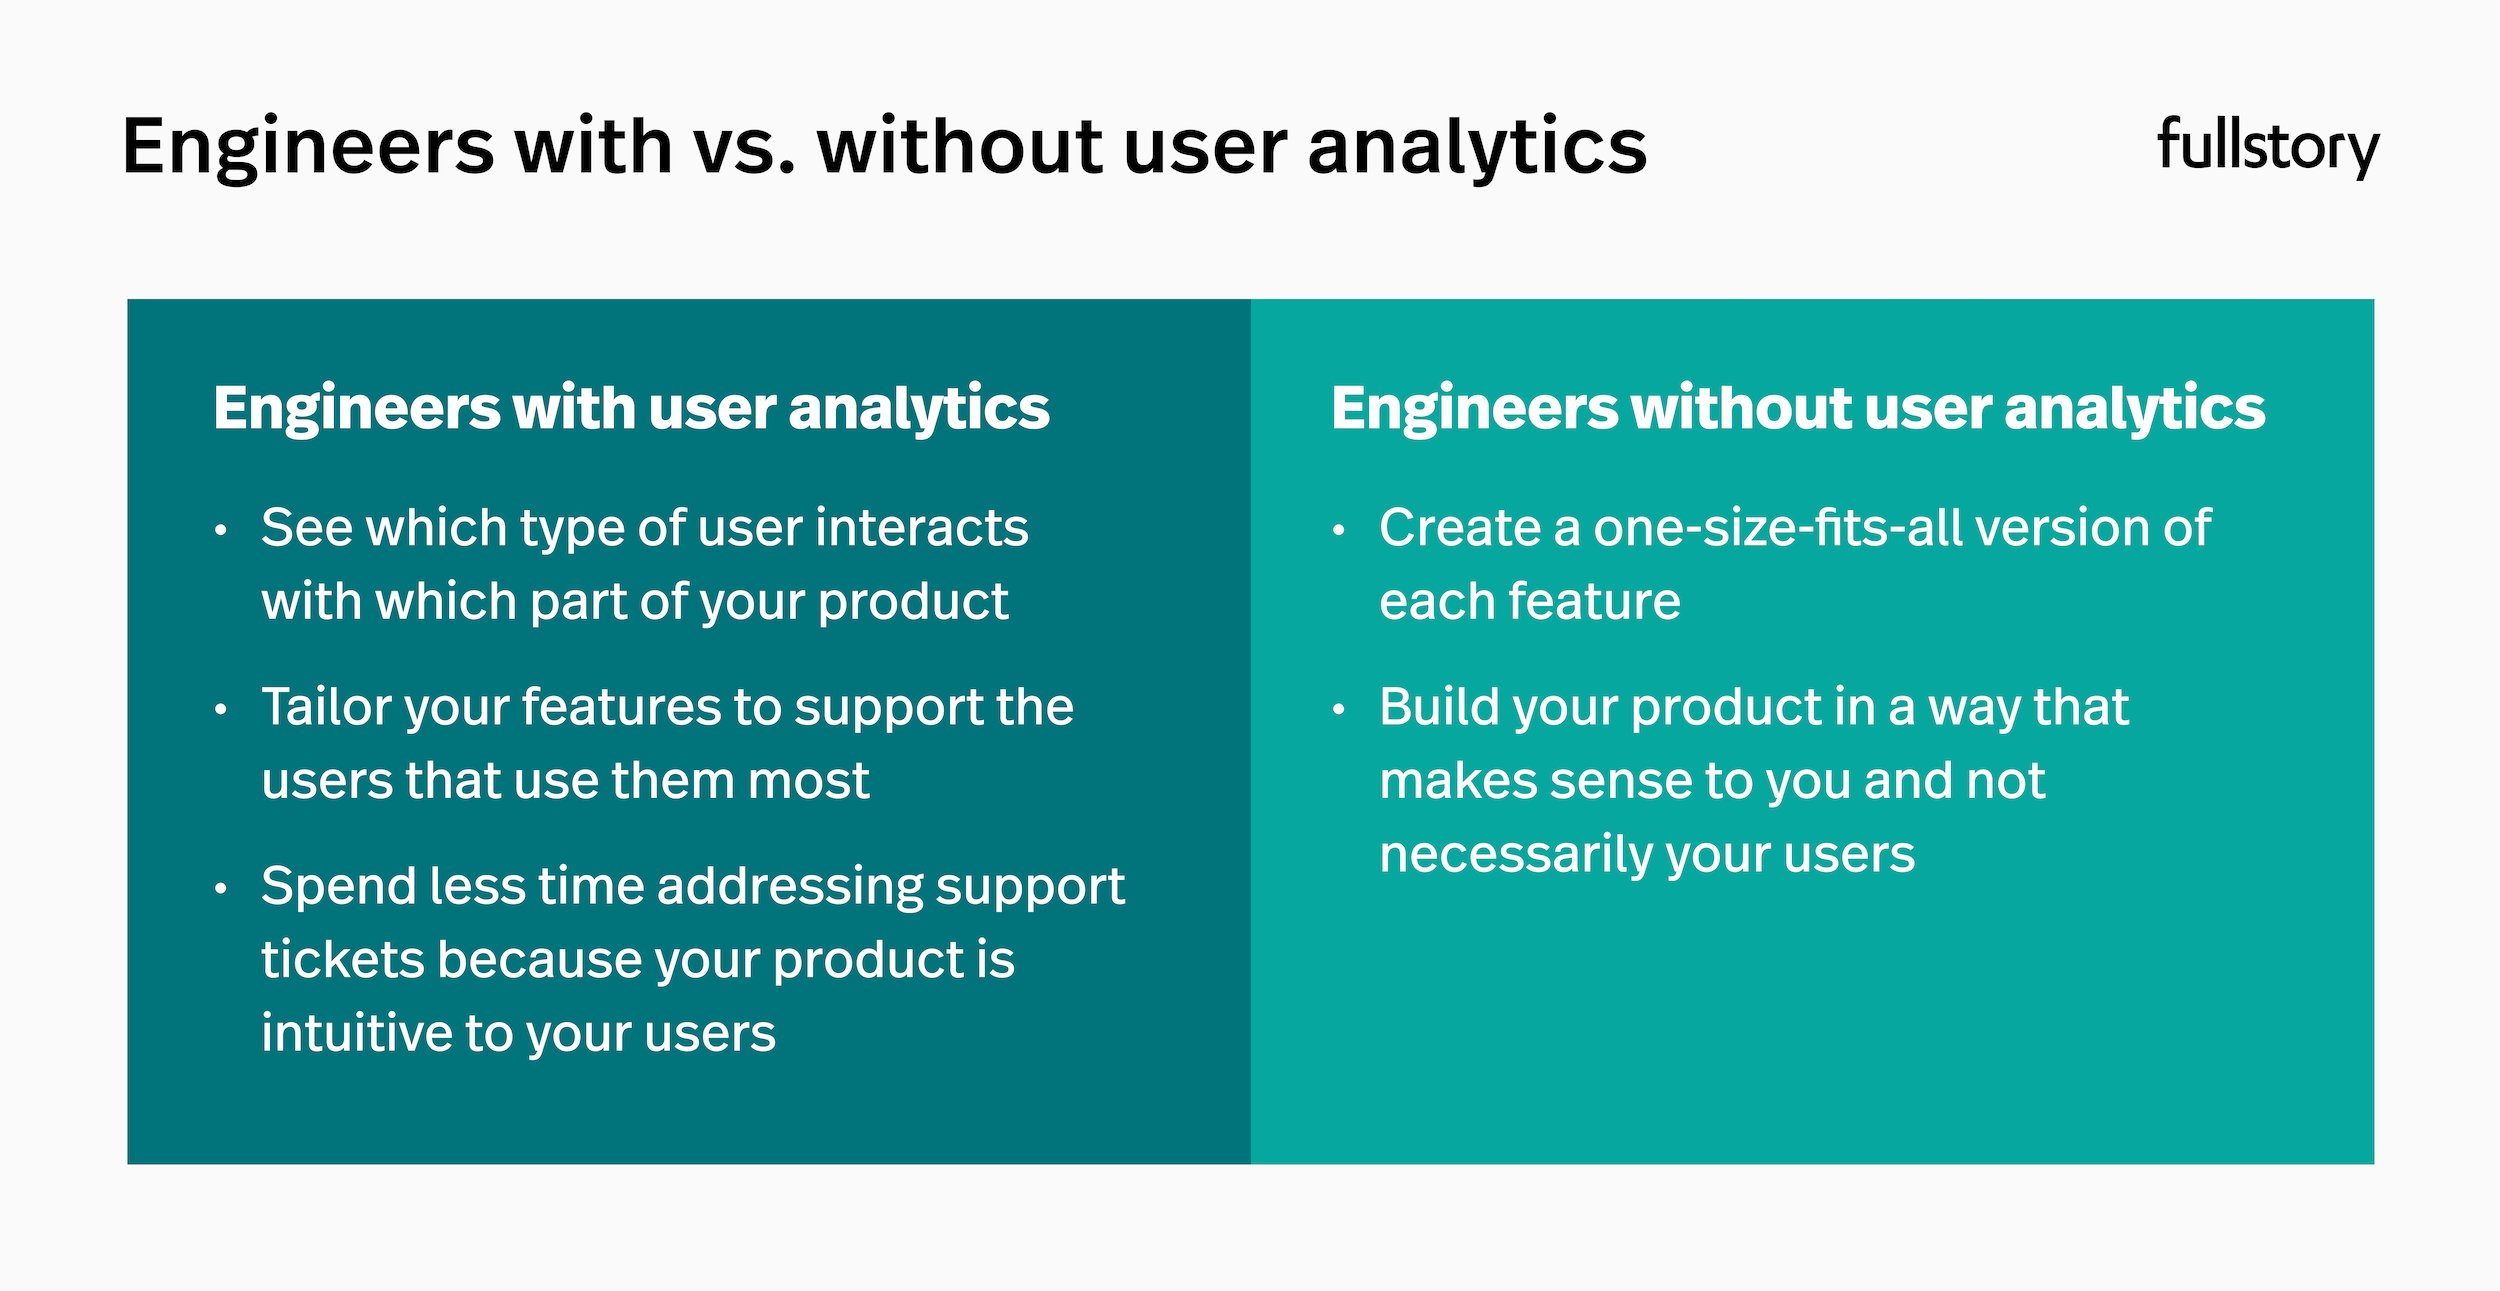 Engineers with user analytics